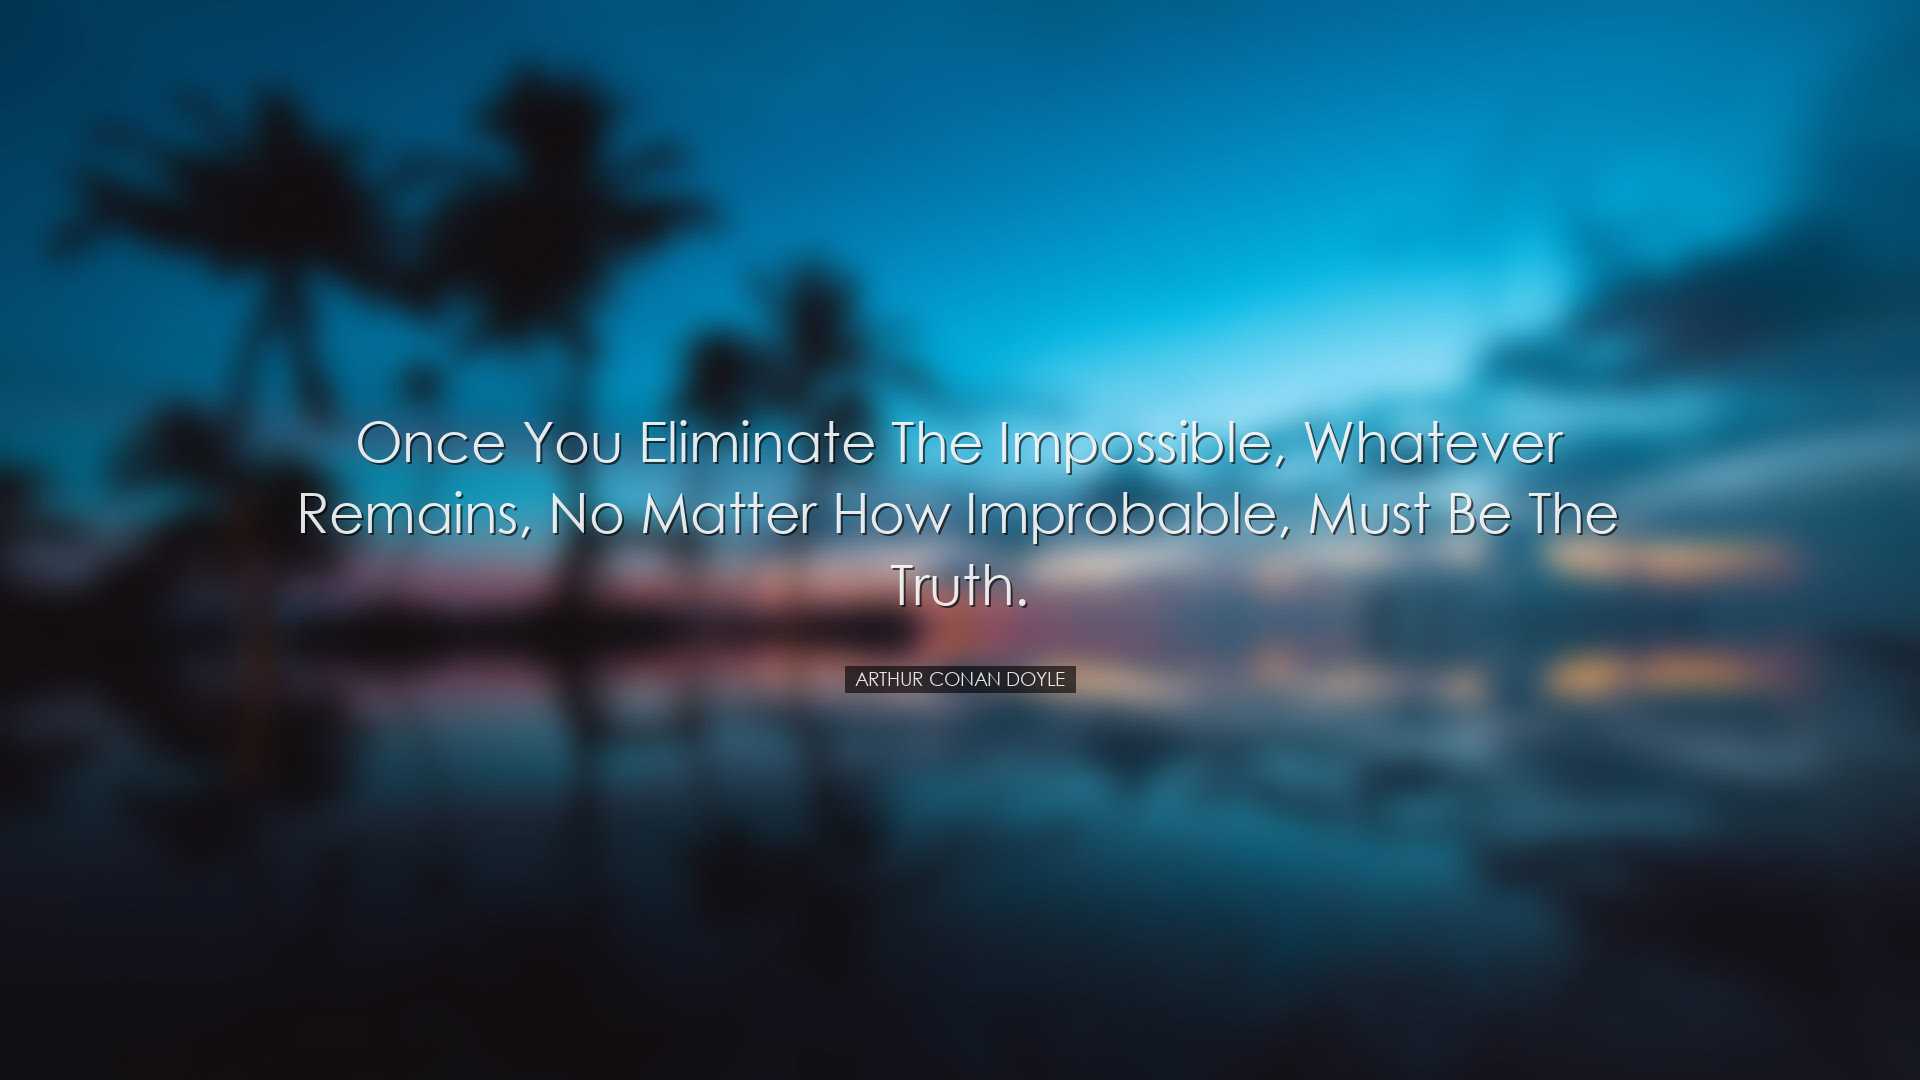 Once you eliminate the impossible, whatever remains, no matter how